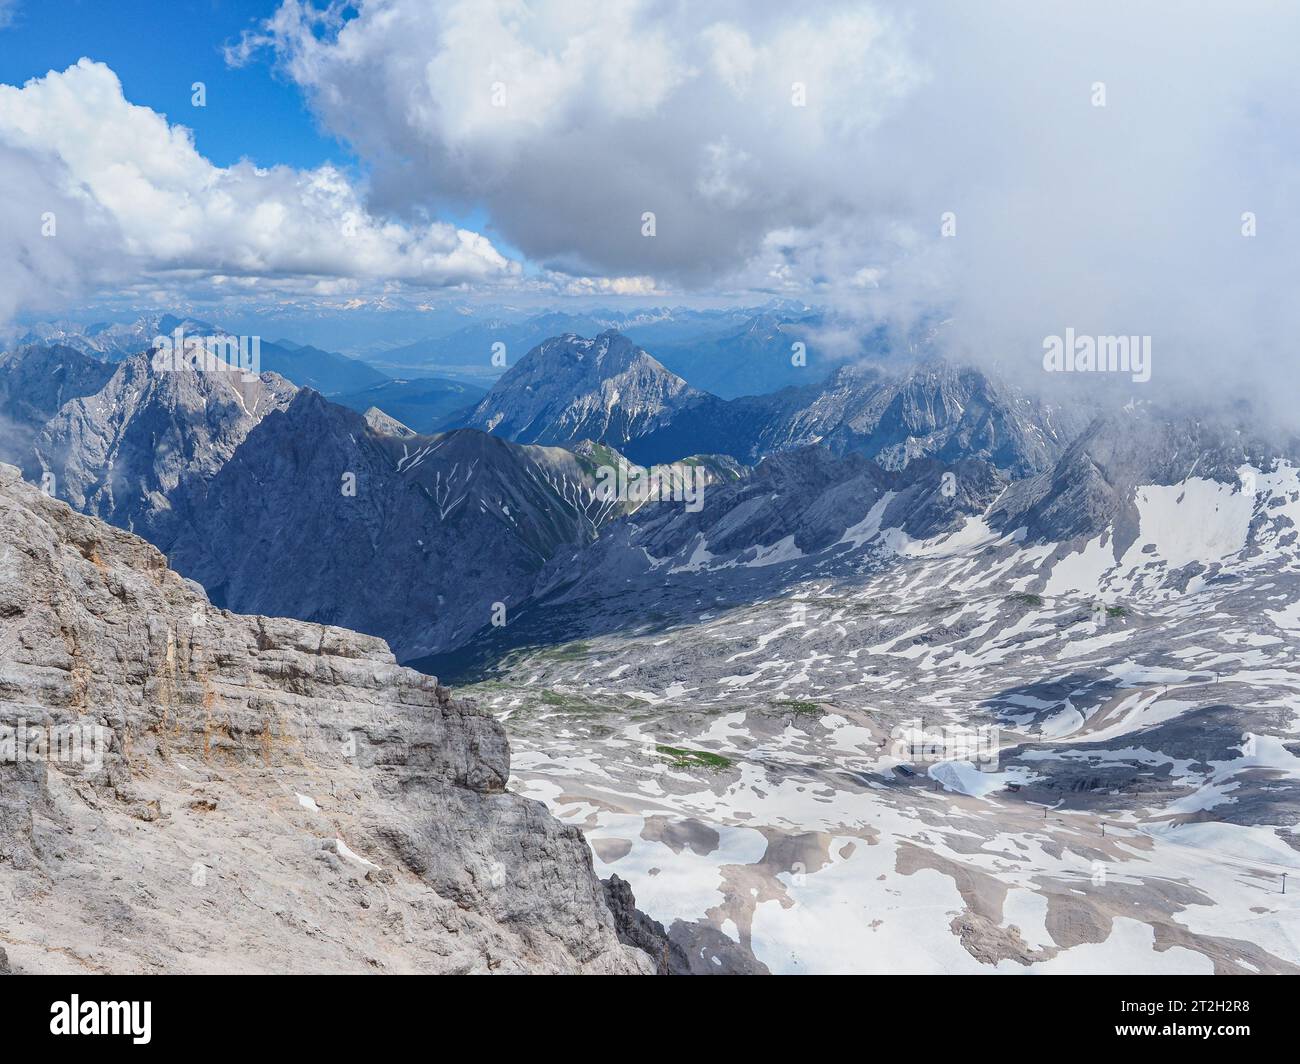 Beautiful landscape with Alpine mountains and cloudy sky. Snowy peaks in Bavaria. View from the observation deck at the top of Zugspitze. Germany. Stock Photo